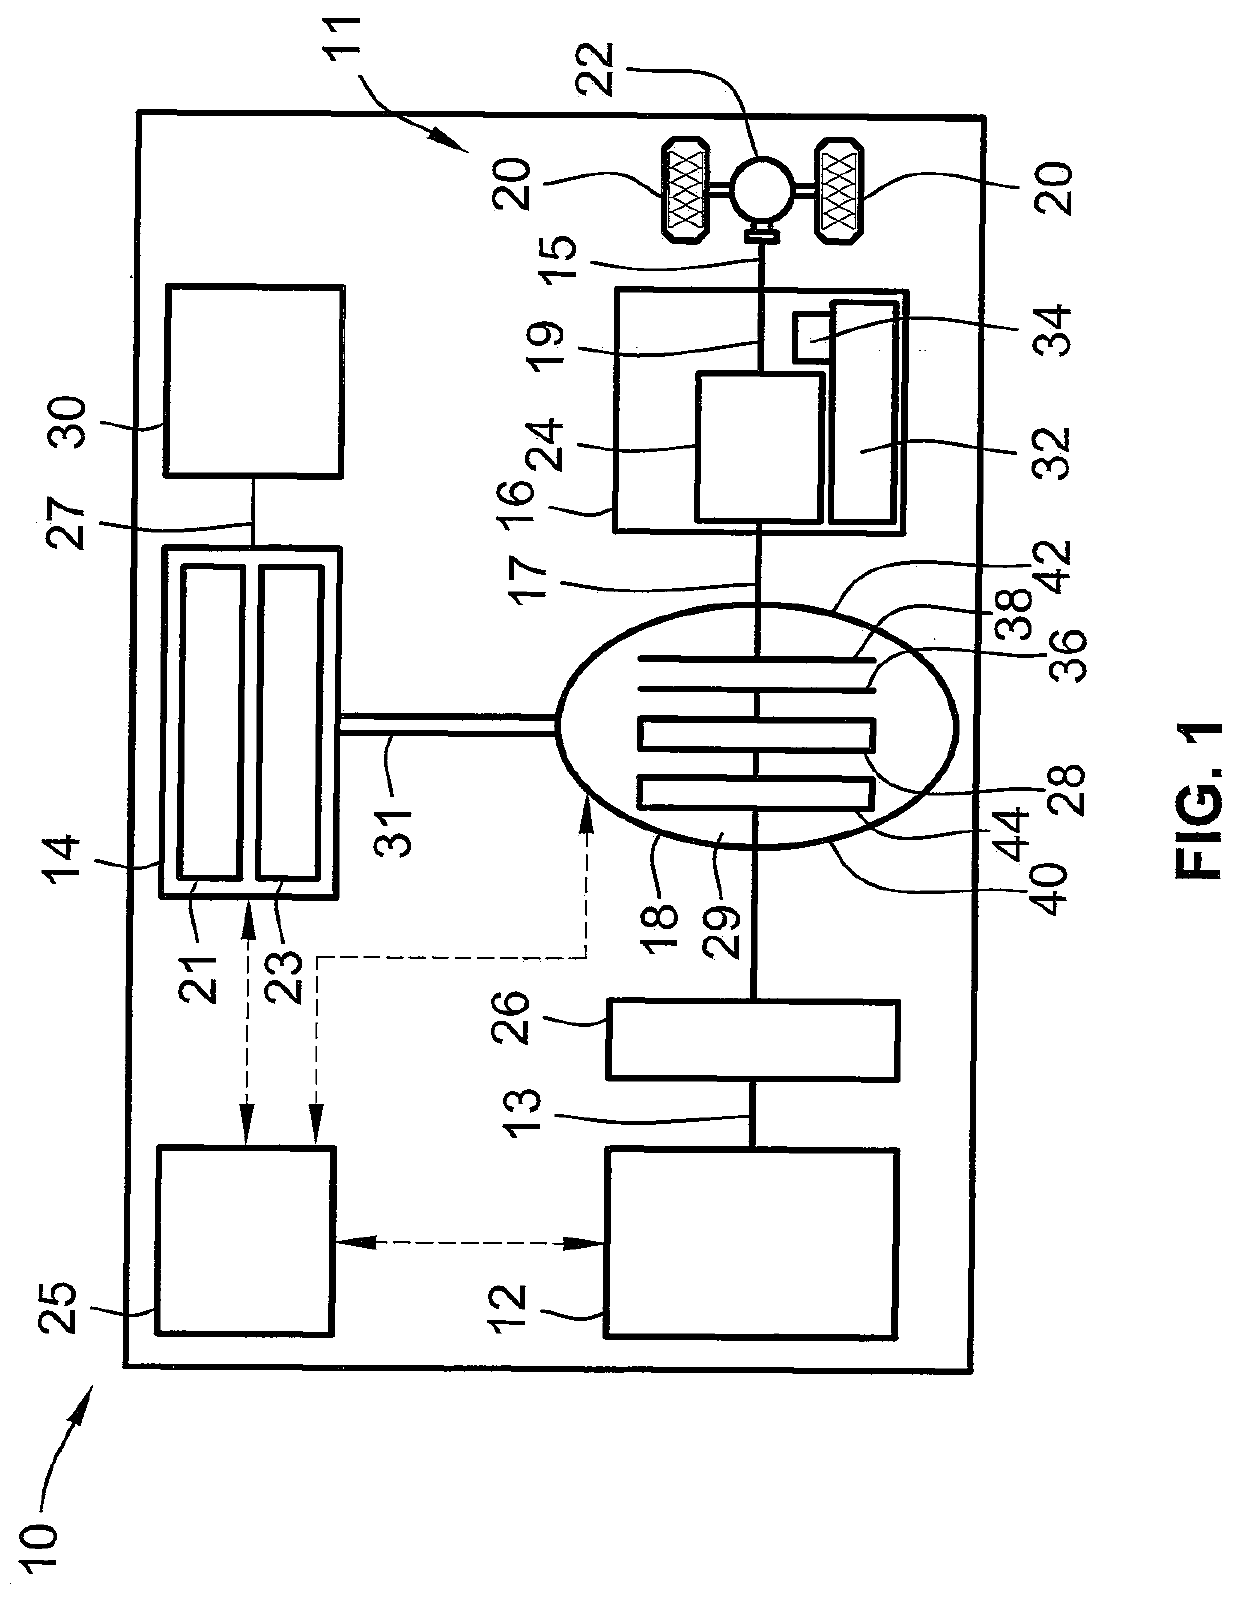 Torque converter assemblies with integrated planetary-type torsional vibration dampers